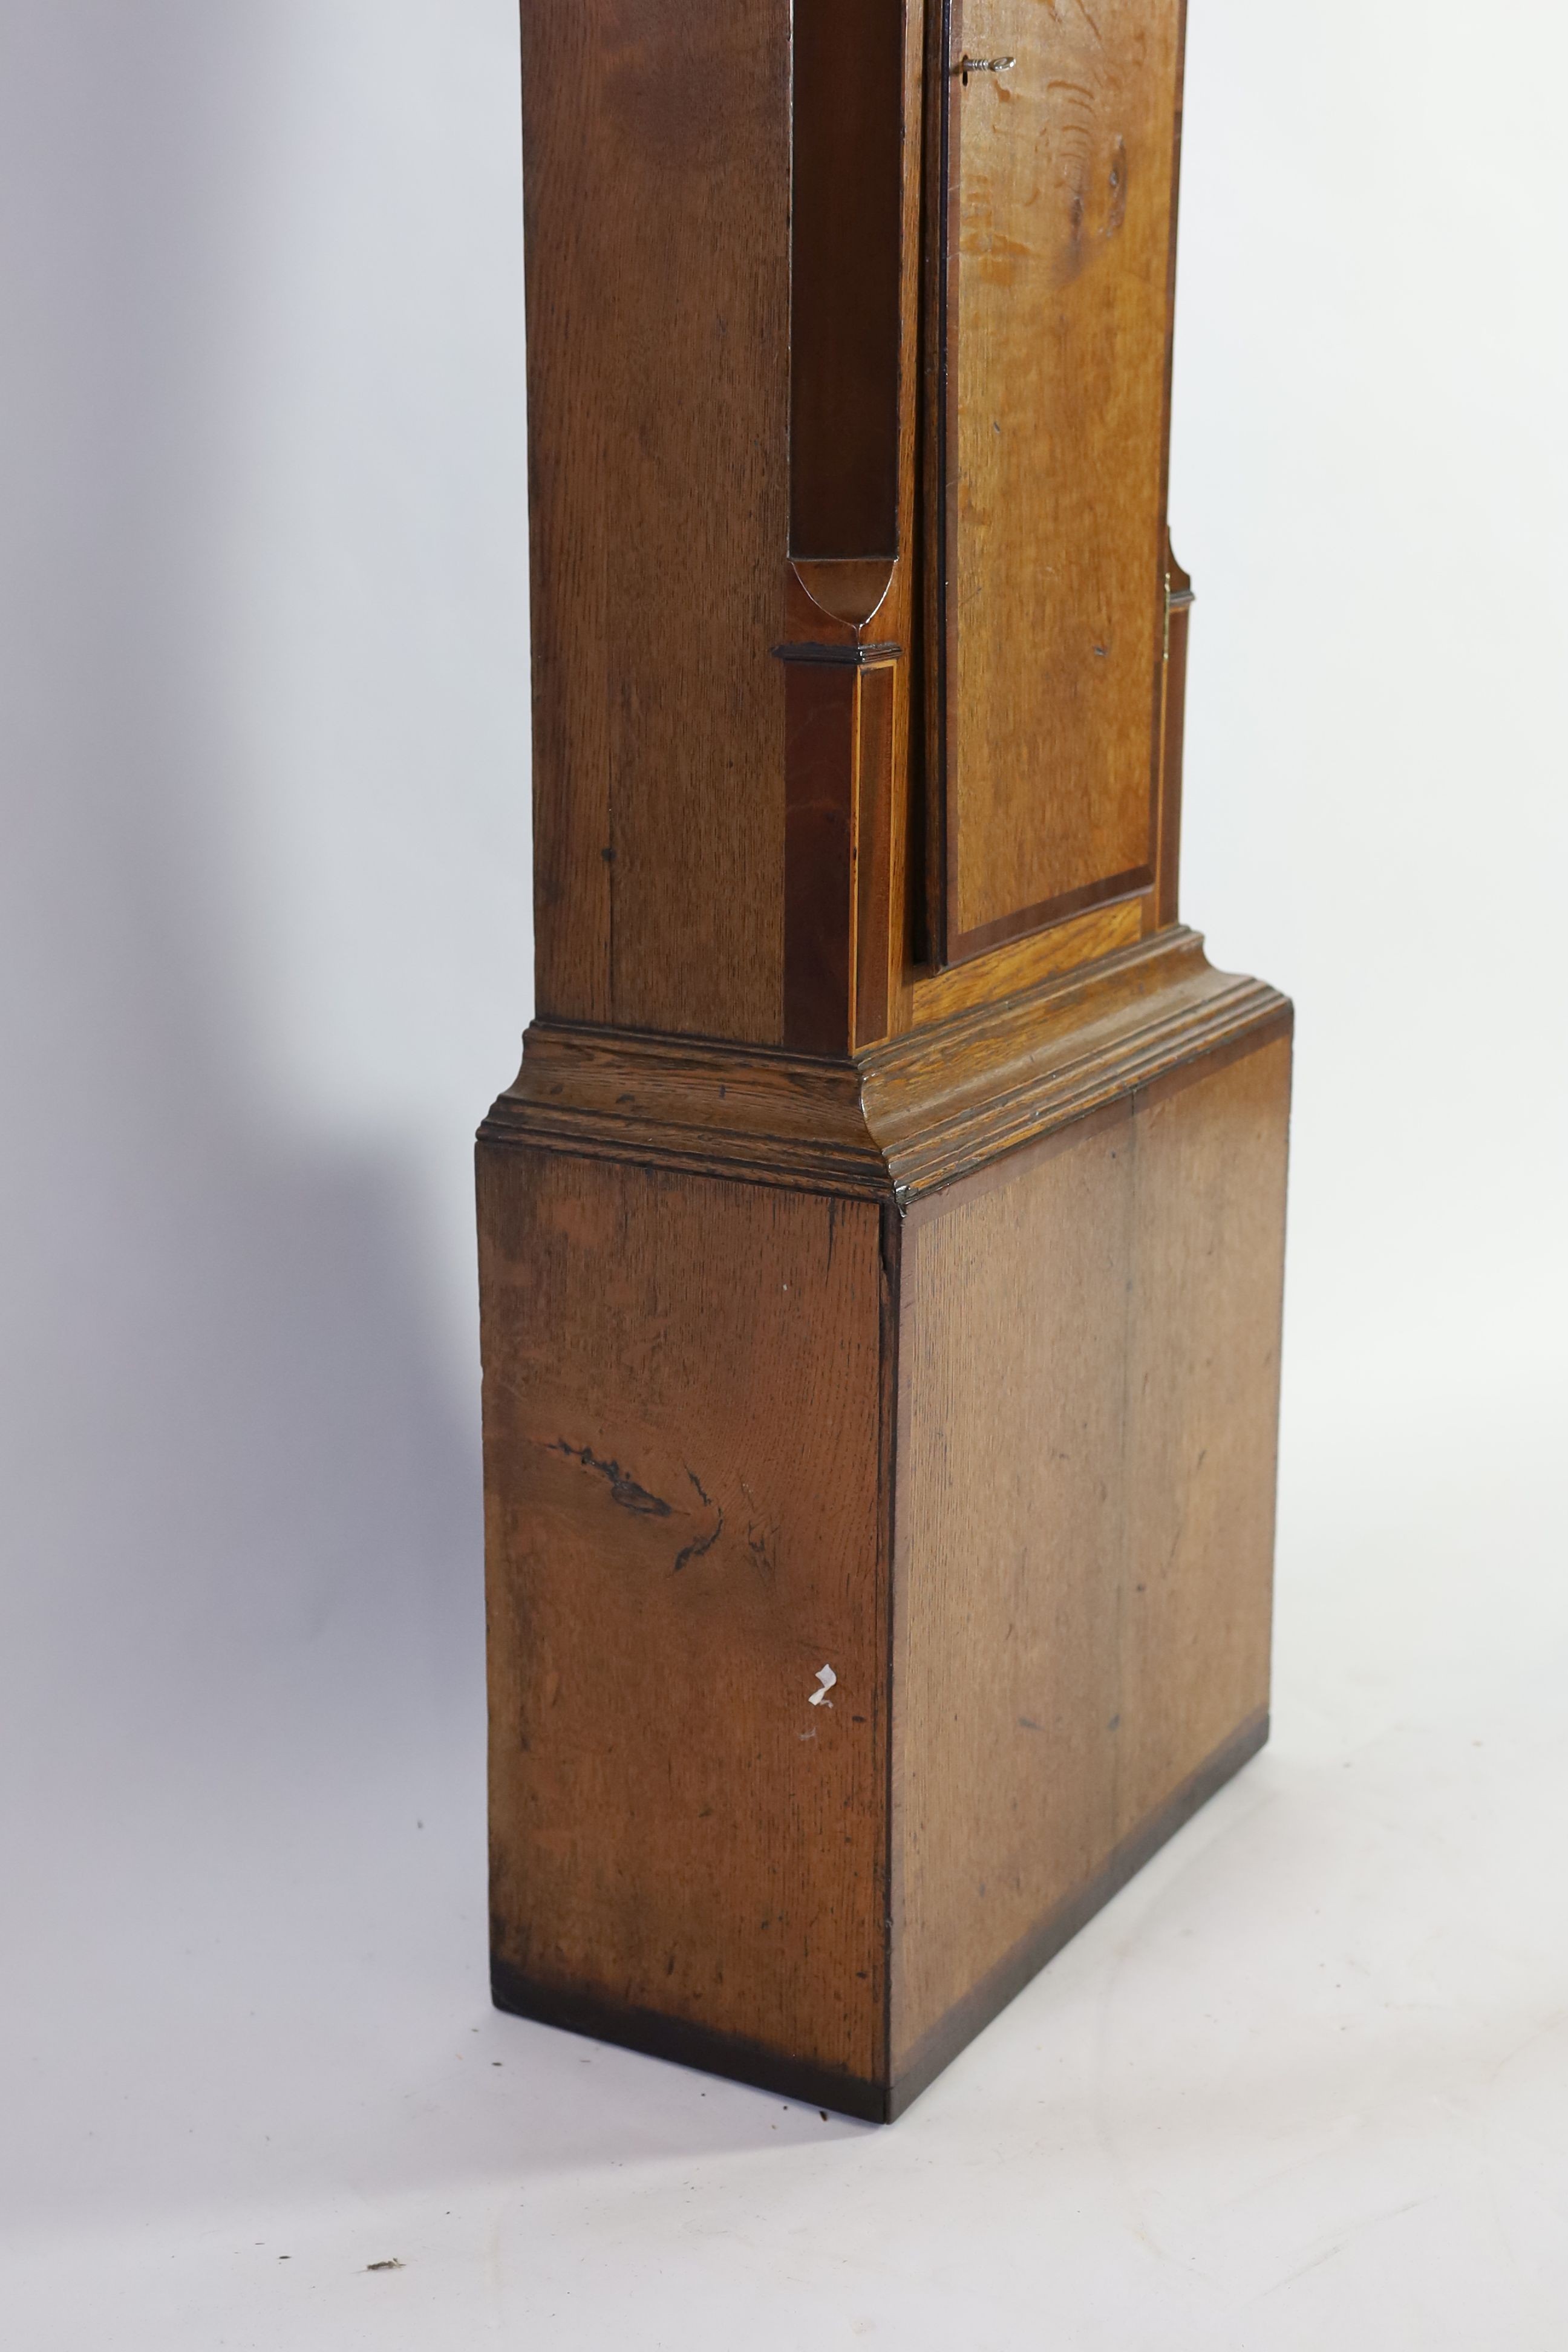 An early 19th century mahogany banded oak eight day longcase clock, by Collinson, Kendal, with 32cm painted dial, case 204cm high